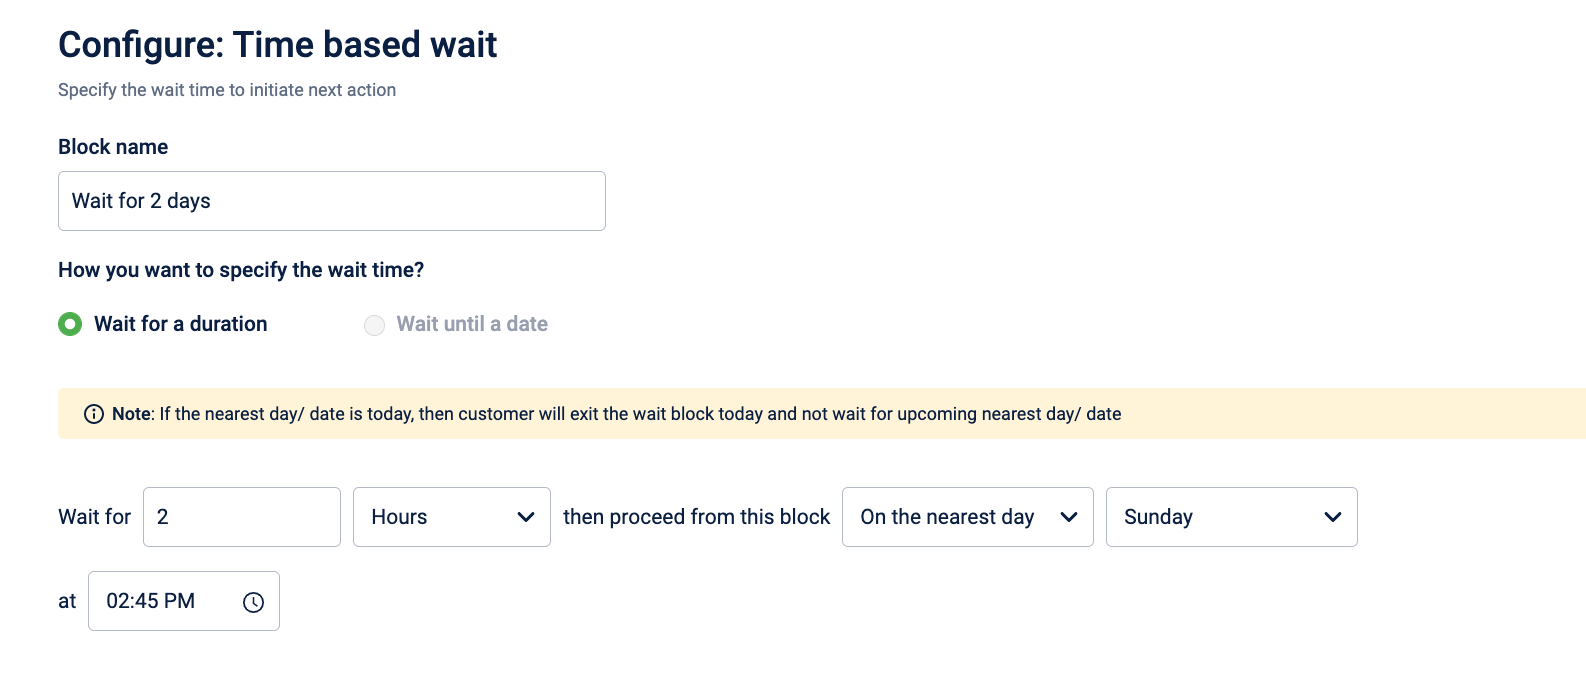 How to configure “Wait for a duration” on Product UI